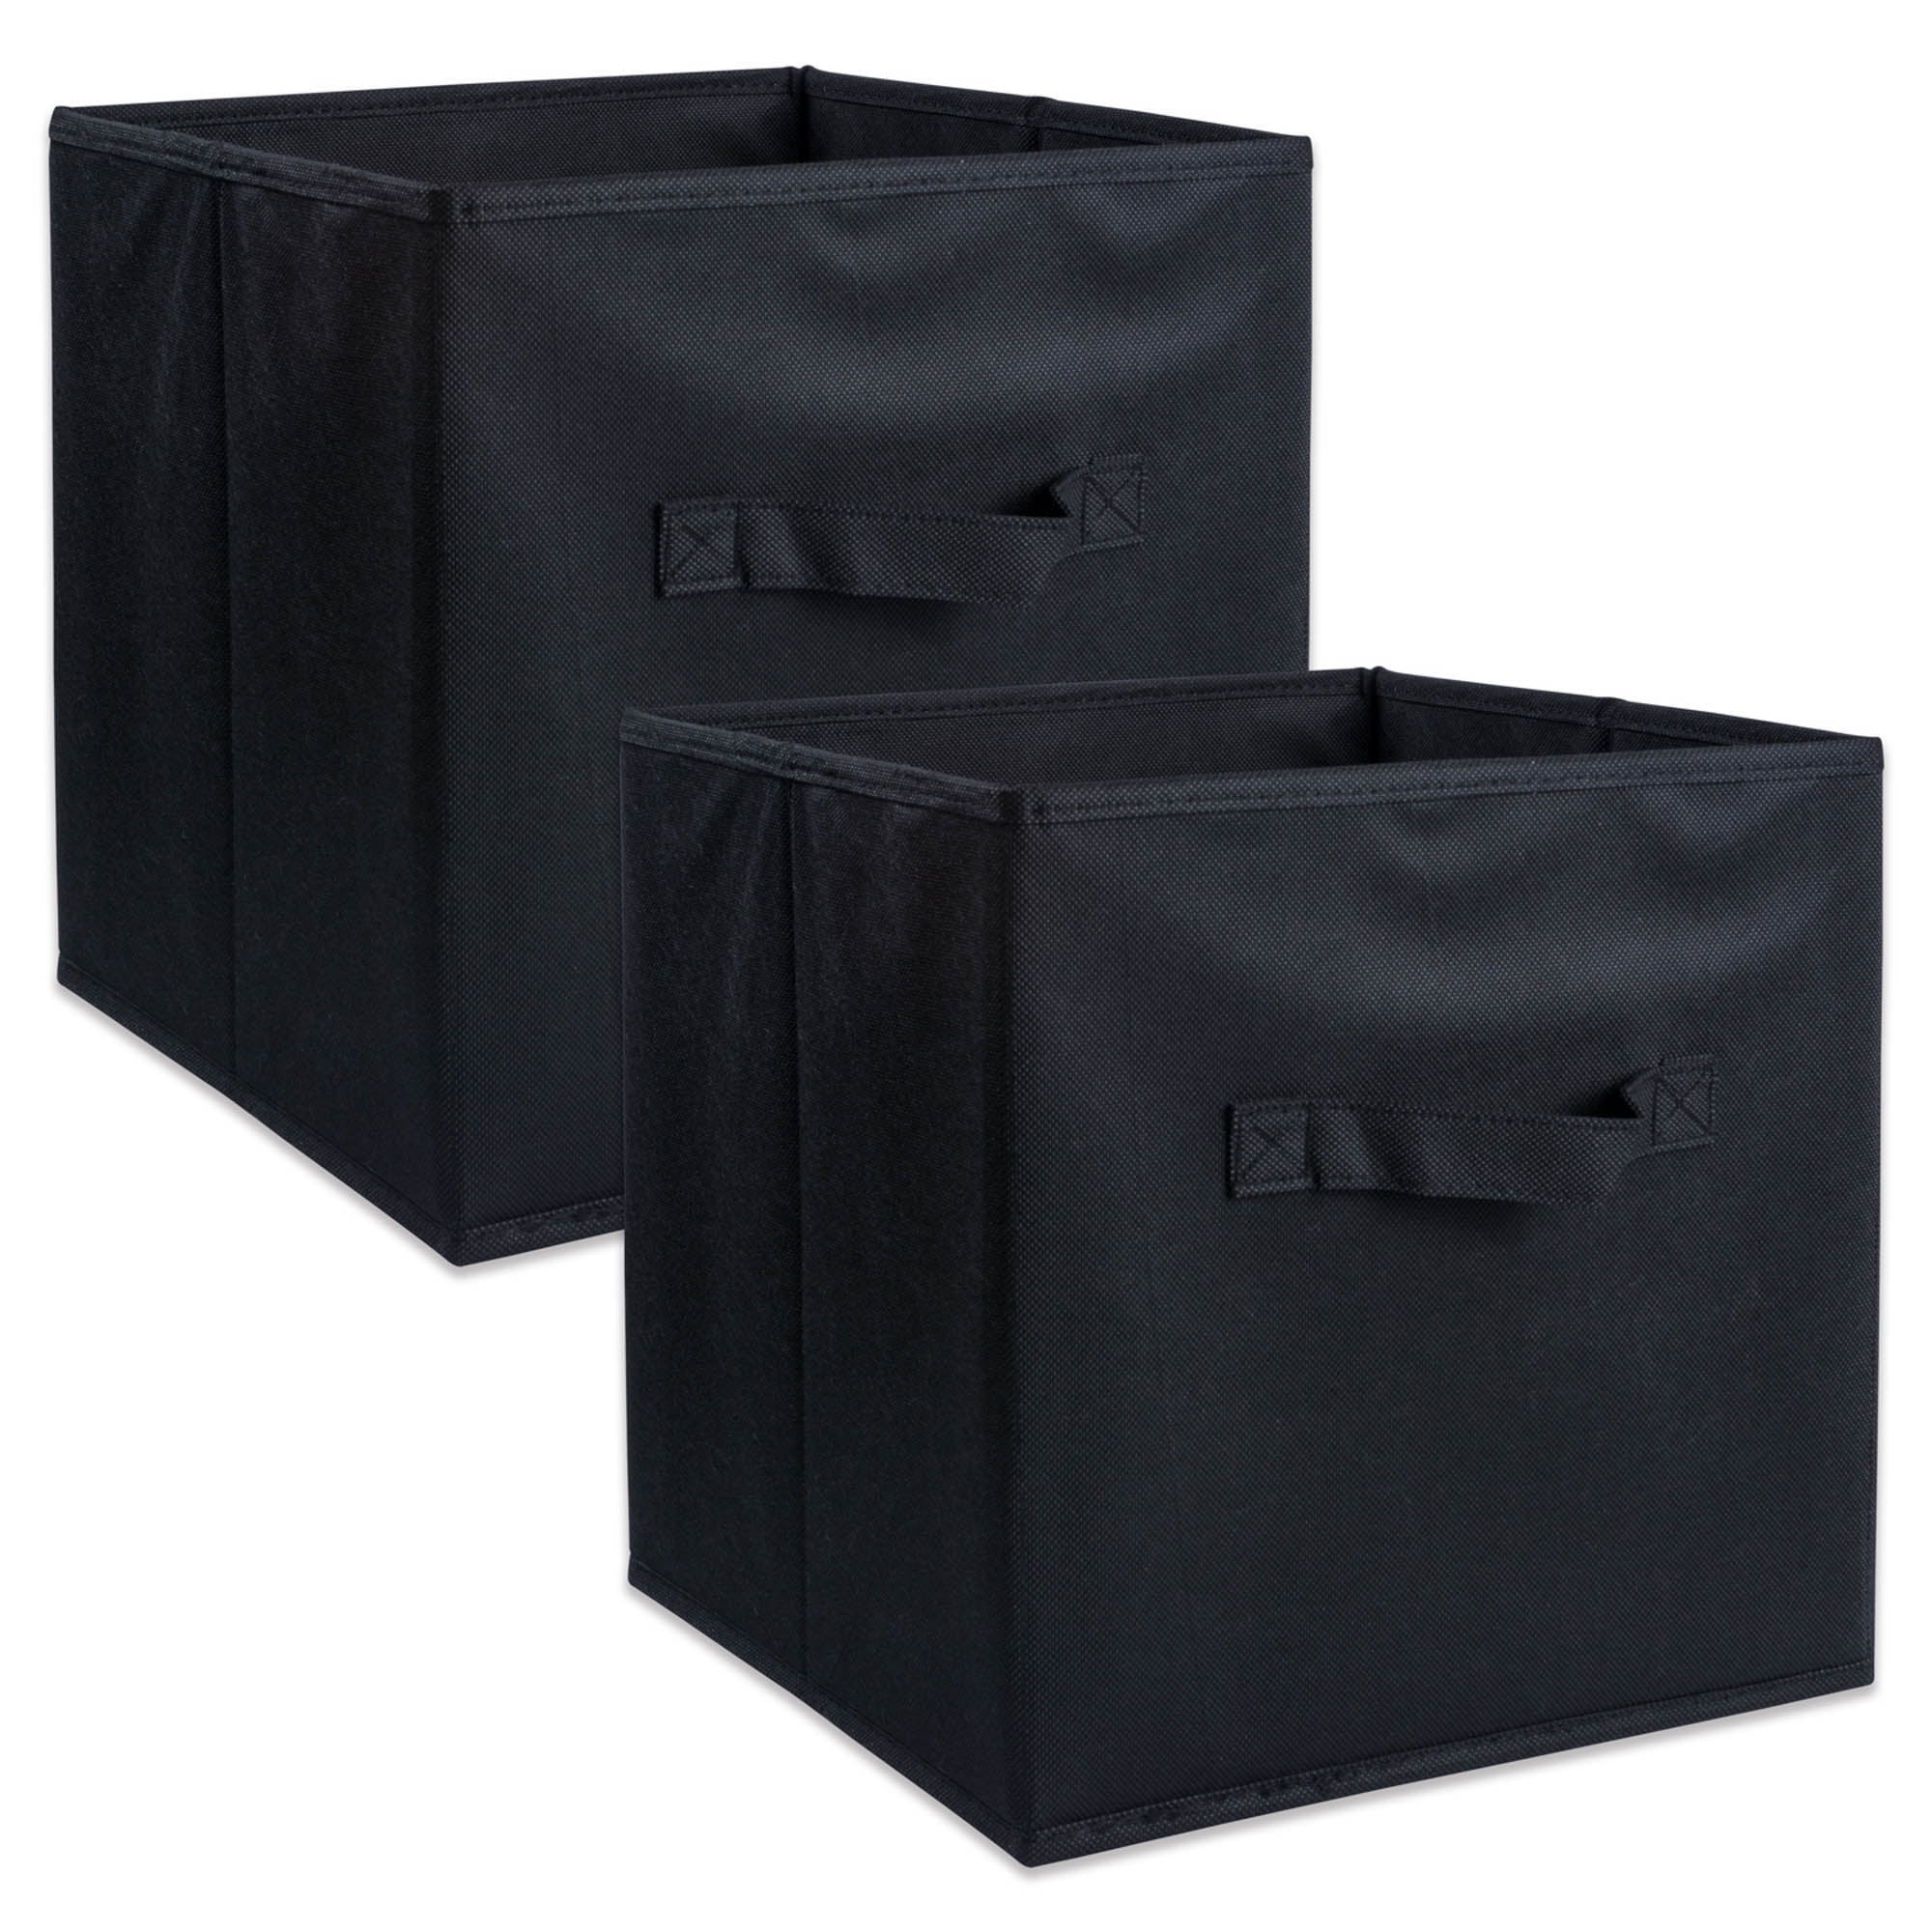 Picture of Design Imports CAMZ37166 11 x 11 x 11 in. Nonwoven Pp Solid Square Storage Cube, Black - Set of 2